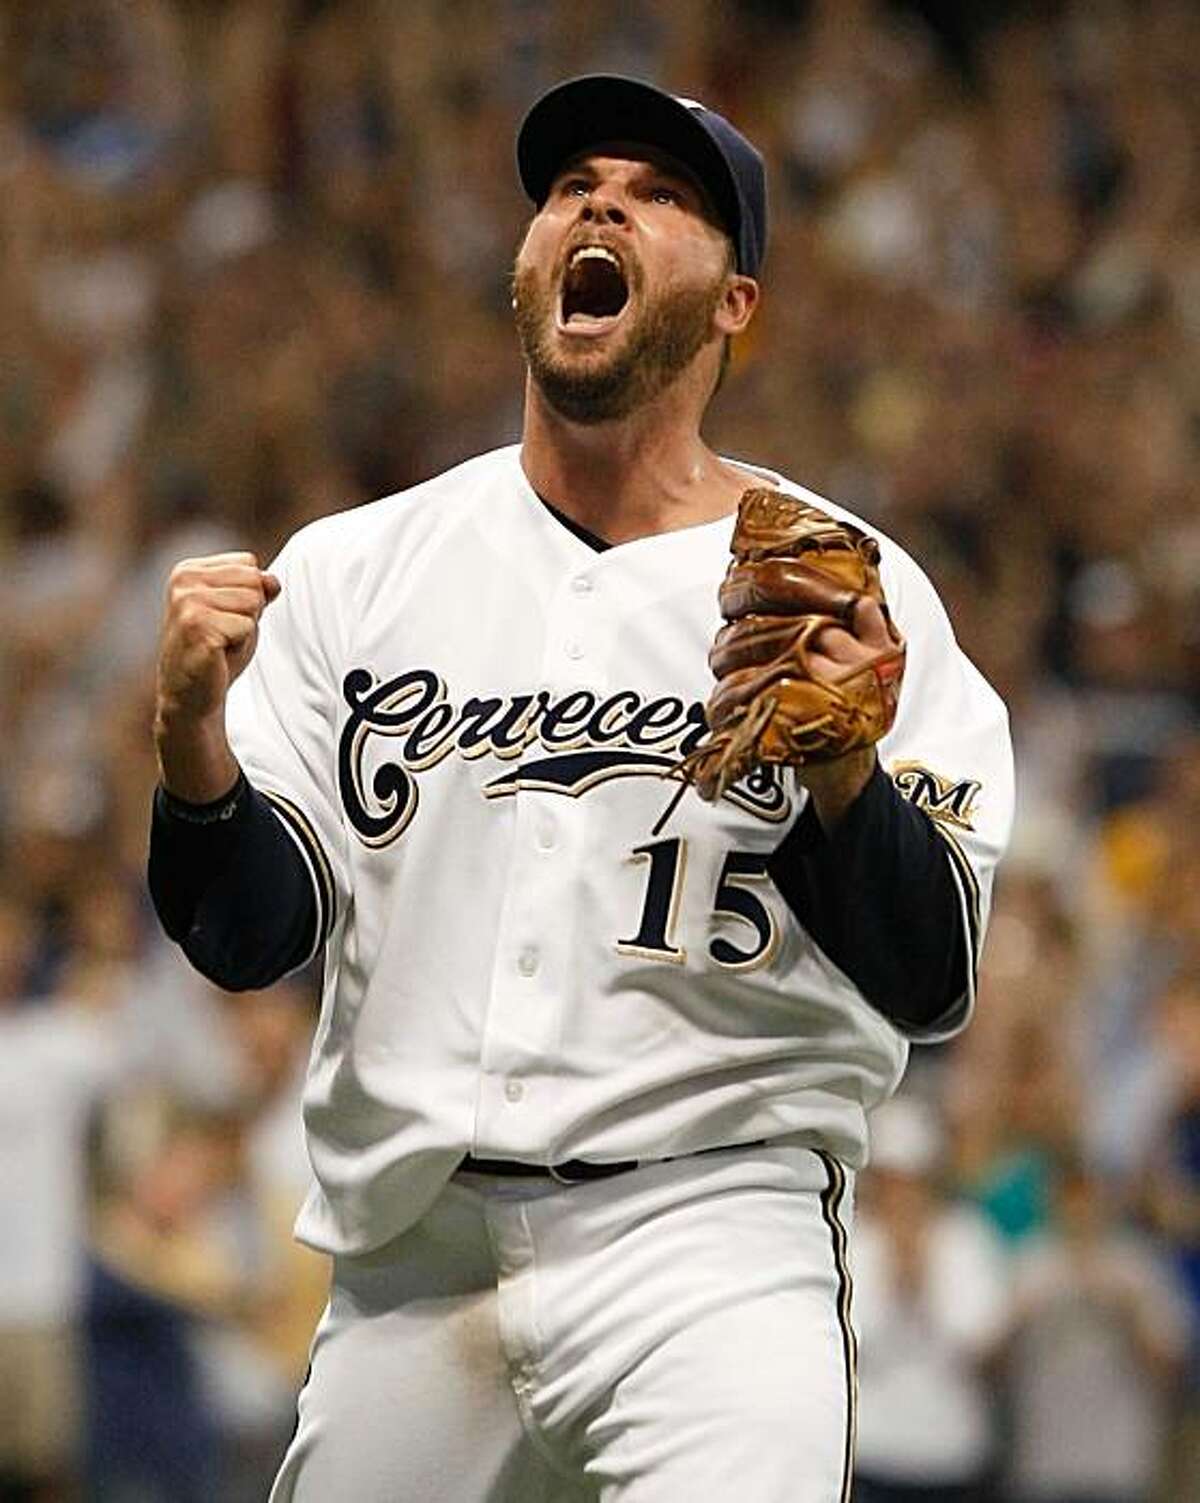 Milwaukee Brewers pitcher Ben Sheets celebrates after the final out against the San Diego Padres in the ninth inning of a baseball game Saturday, Sept. 6, 2008, in Milwaukee. Sheets pitched a complete game shutout, giving up five hits to the Padres. (AP Photo/Bill Waugh)